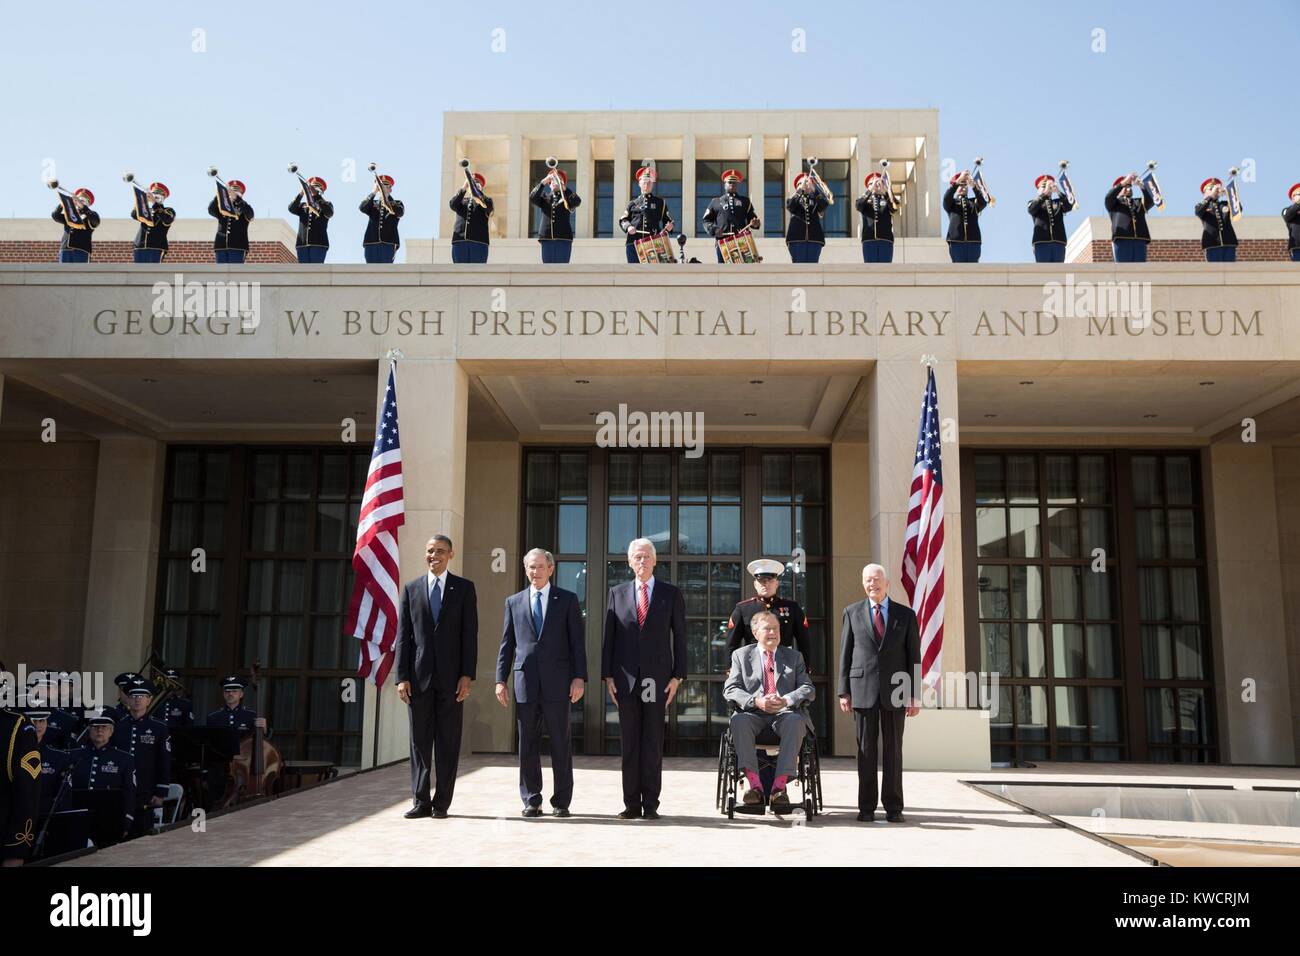 President Barack Obama poses with former Presidents, April 25, 2013. L-R: Barack Obama; George W. Bush; Bill Clinton; George H.W. Bush; Jimmy Carter. They were attending the dedication of the George W. Bush Presidential Library and Museum, Southern Methodist University, Dallas, Texas. (BSLOC 2015 3 51) Stock Photo